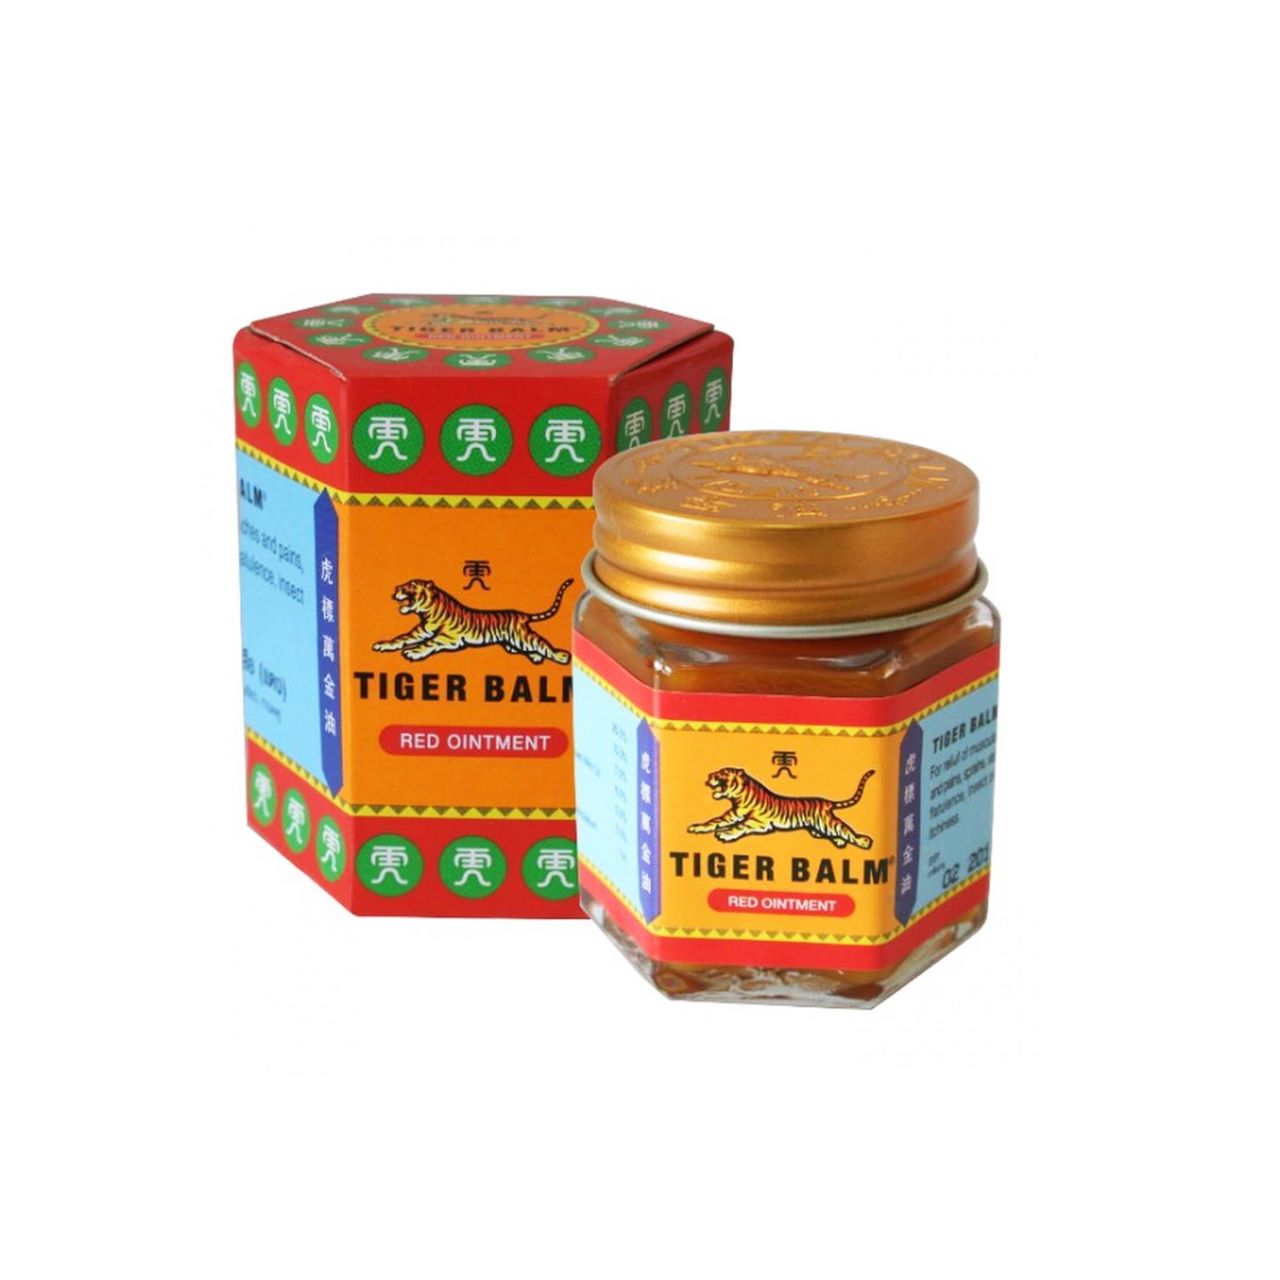 Tigerbalm Red Ointment 30g